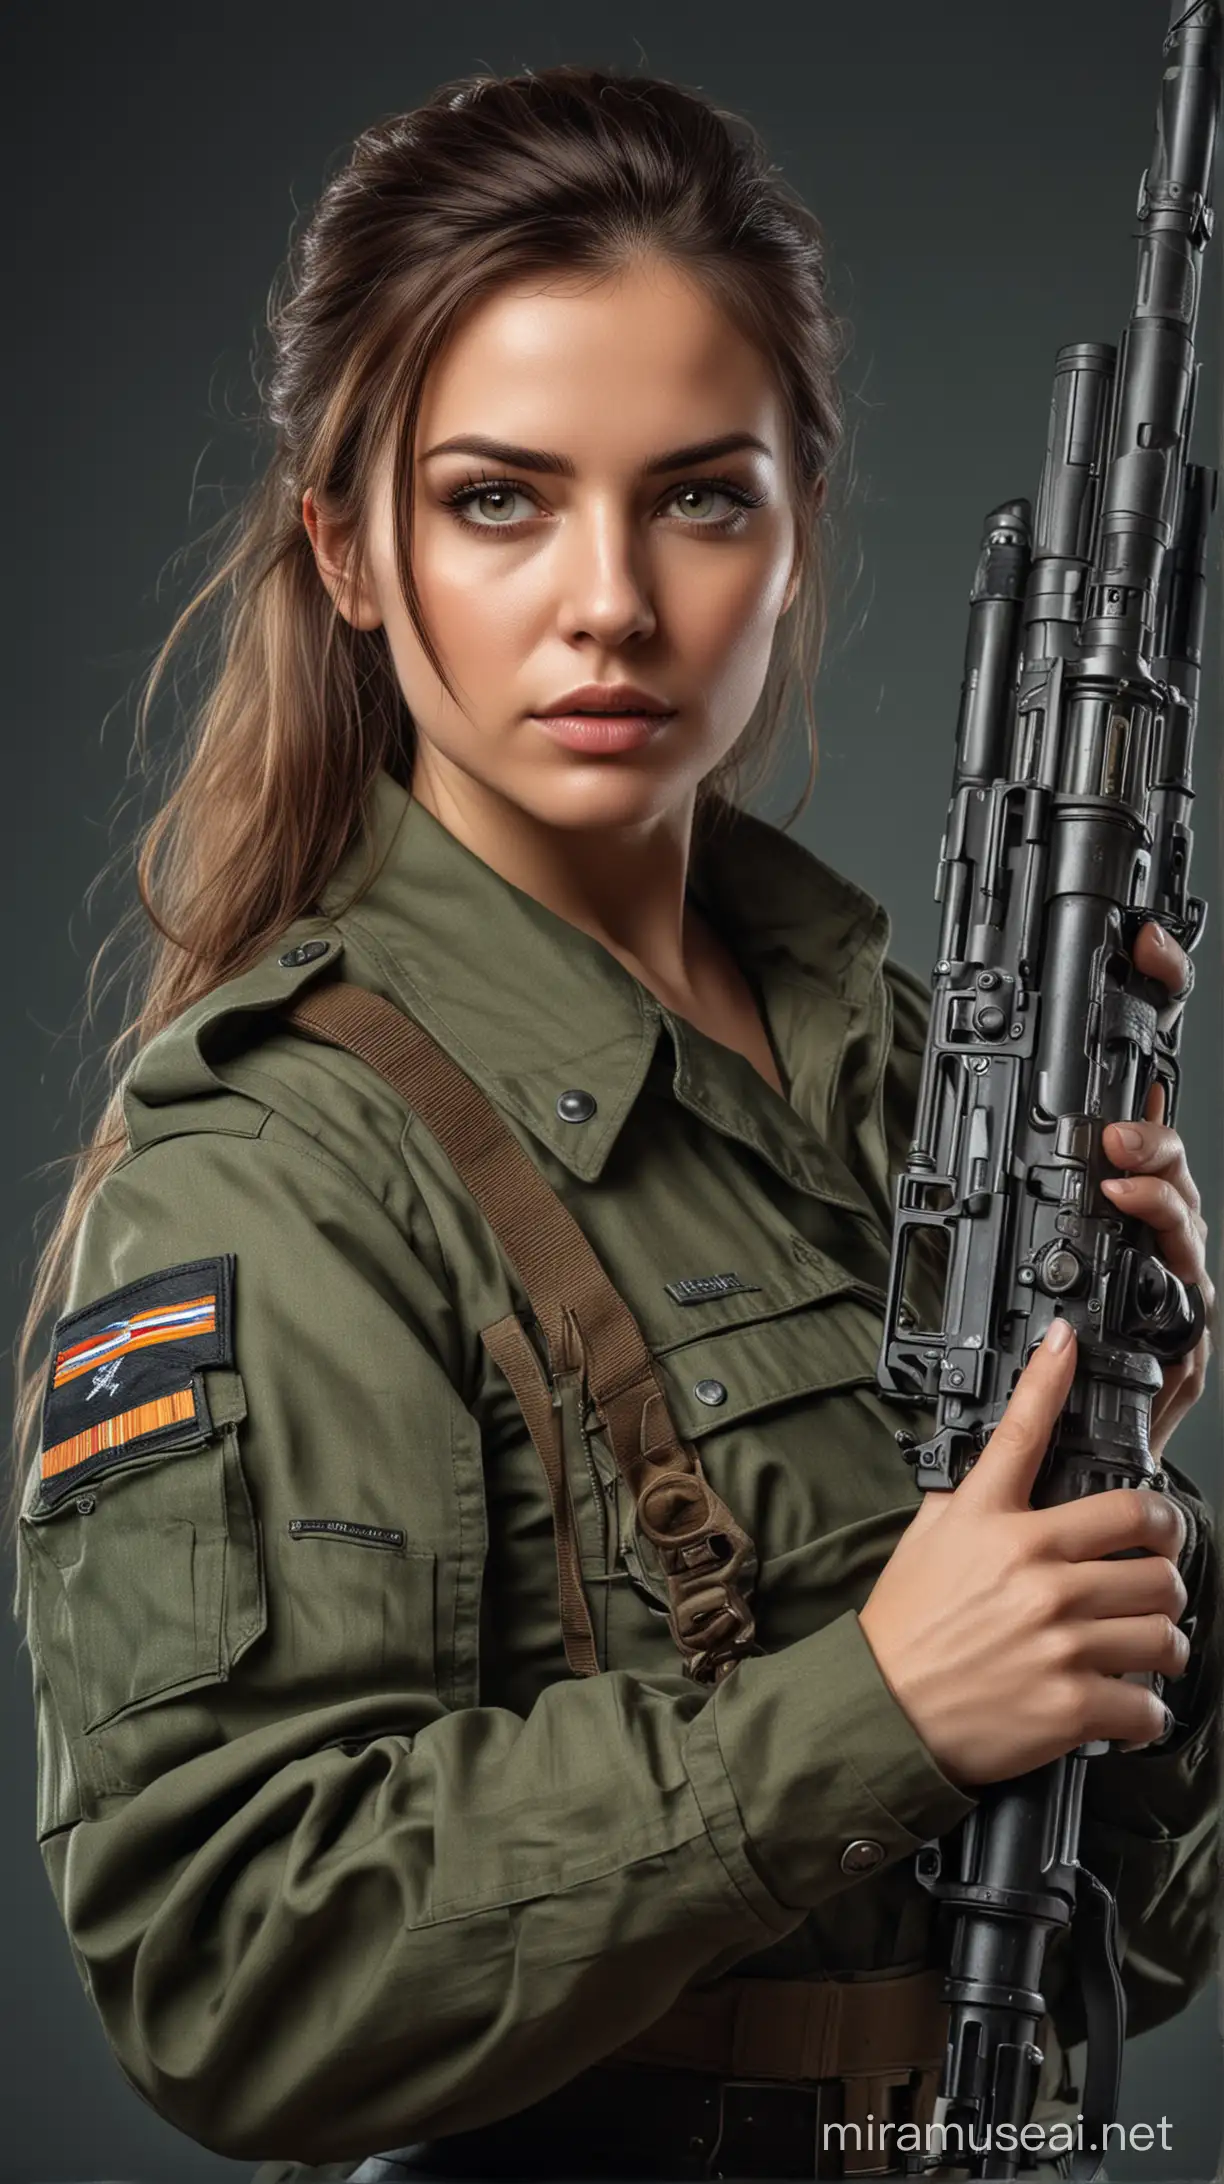 Powerful Military Woman Portrait with Weapon